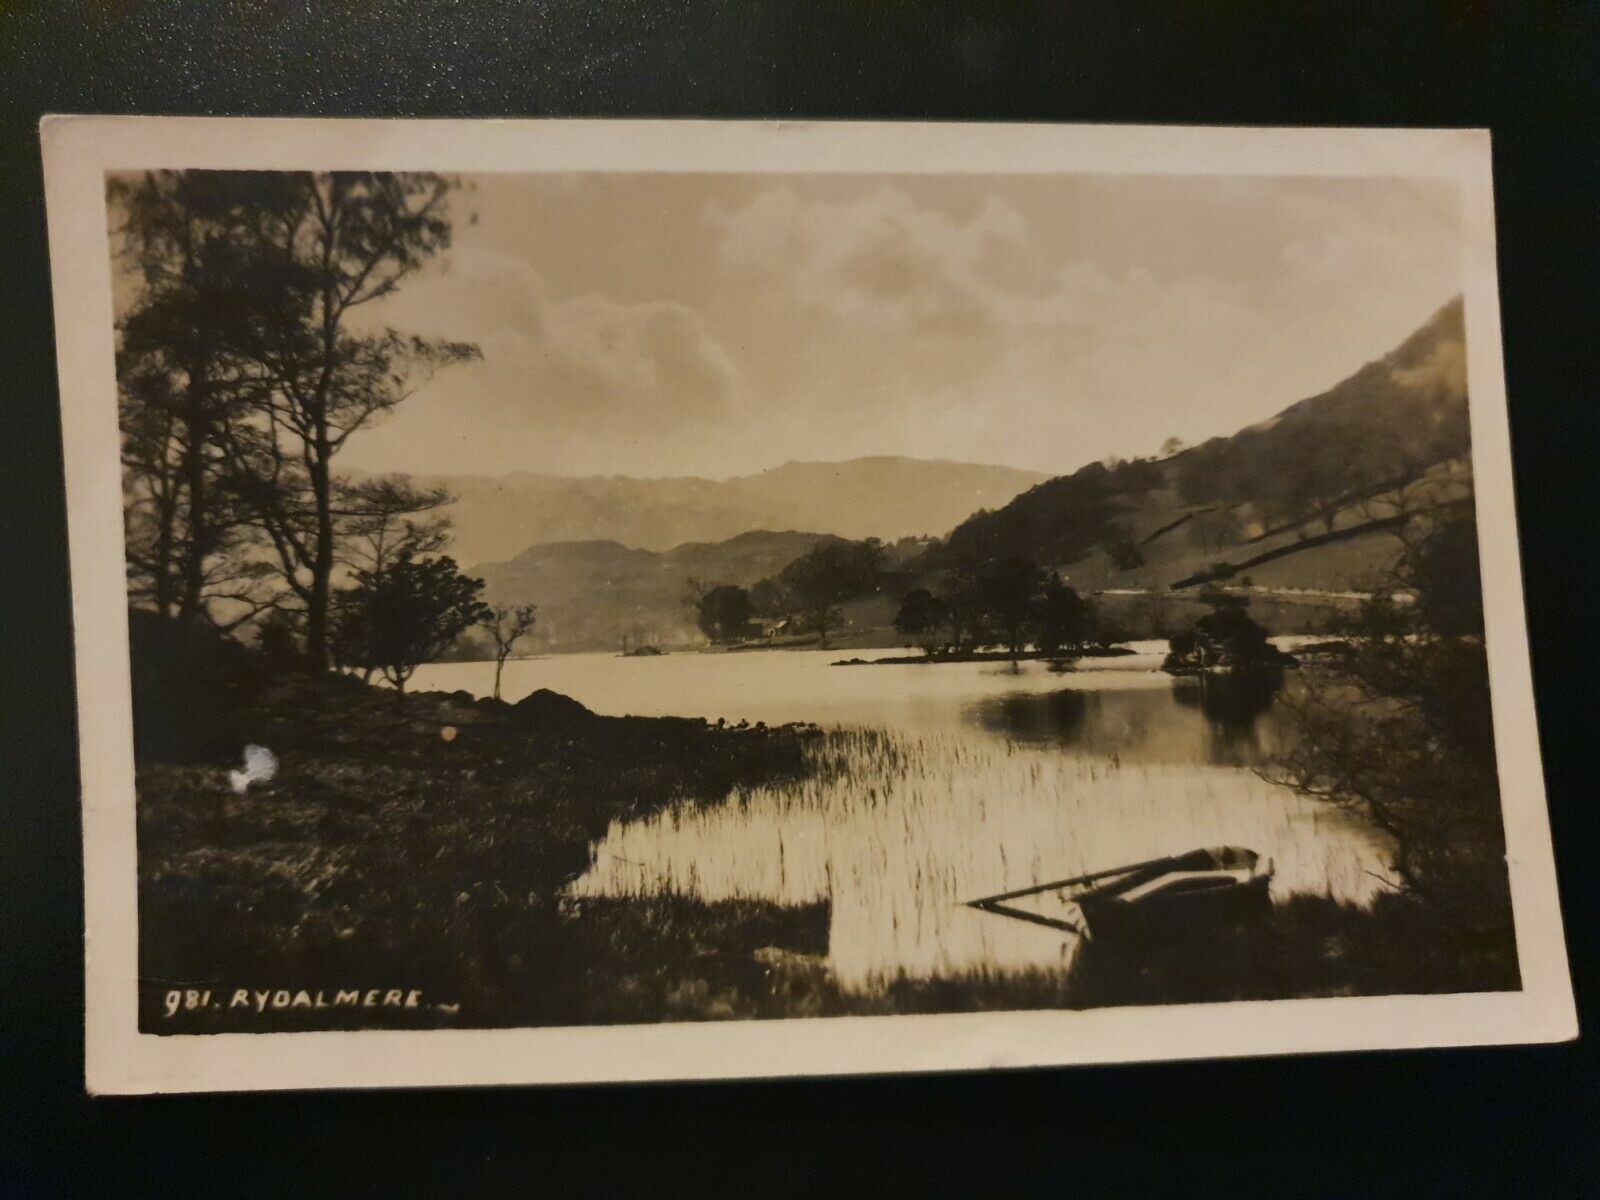 House Clearance - RYDAL MERE CUMBRIA RP POSTCARD 1928